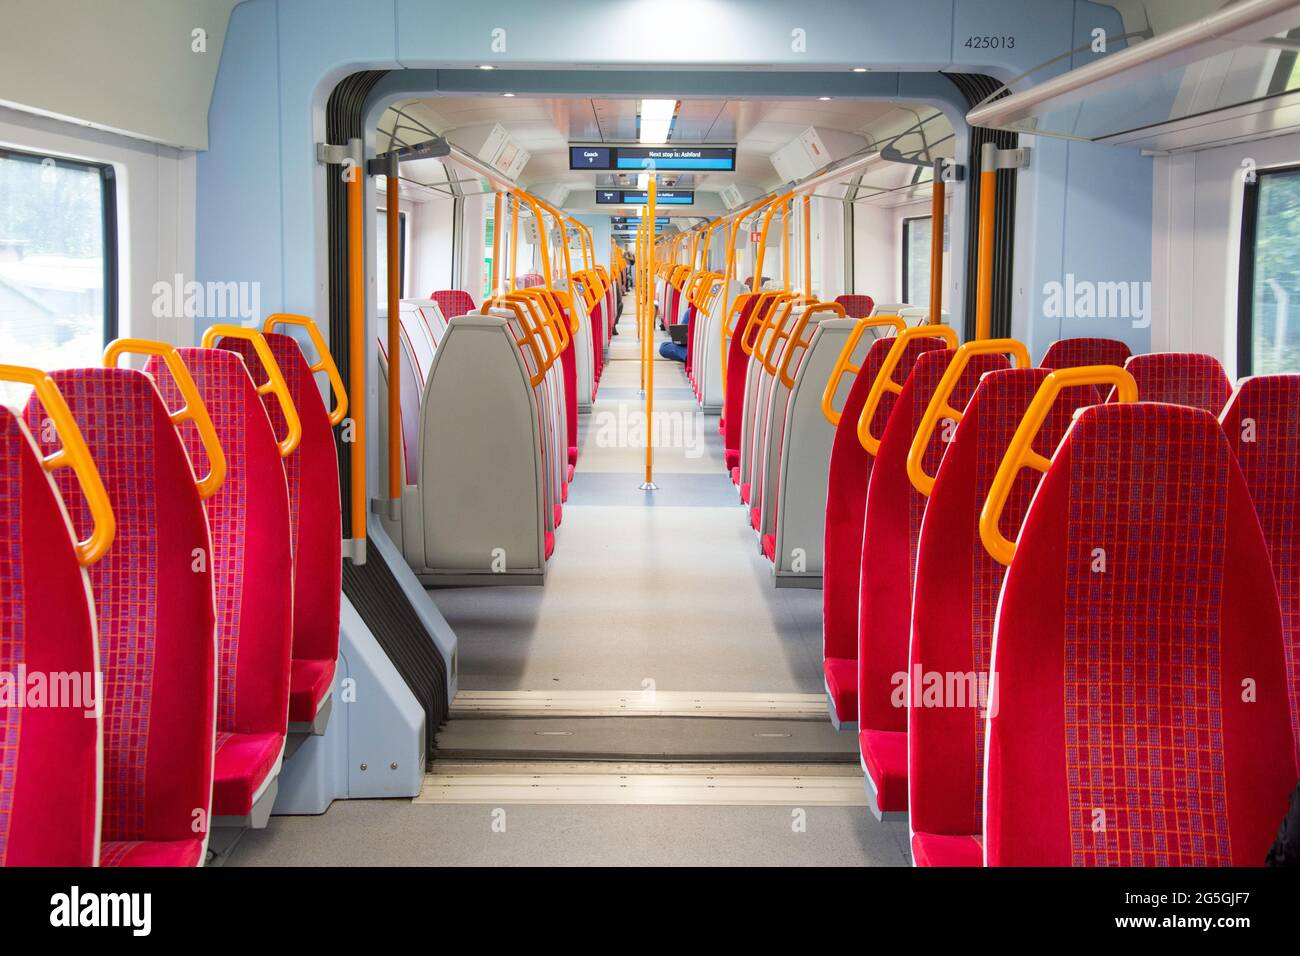 Carriage on South West Train, Clapham Junction Railway Station, Battersea, London Borough of Wandsworth, Greater London, England, United Kingdom Stock Photo